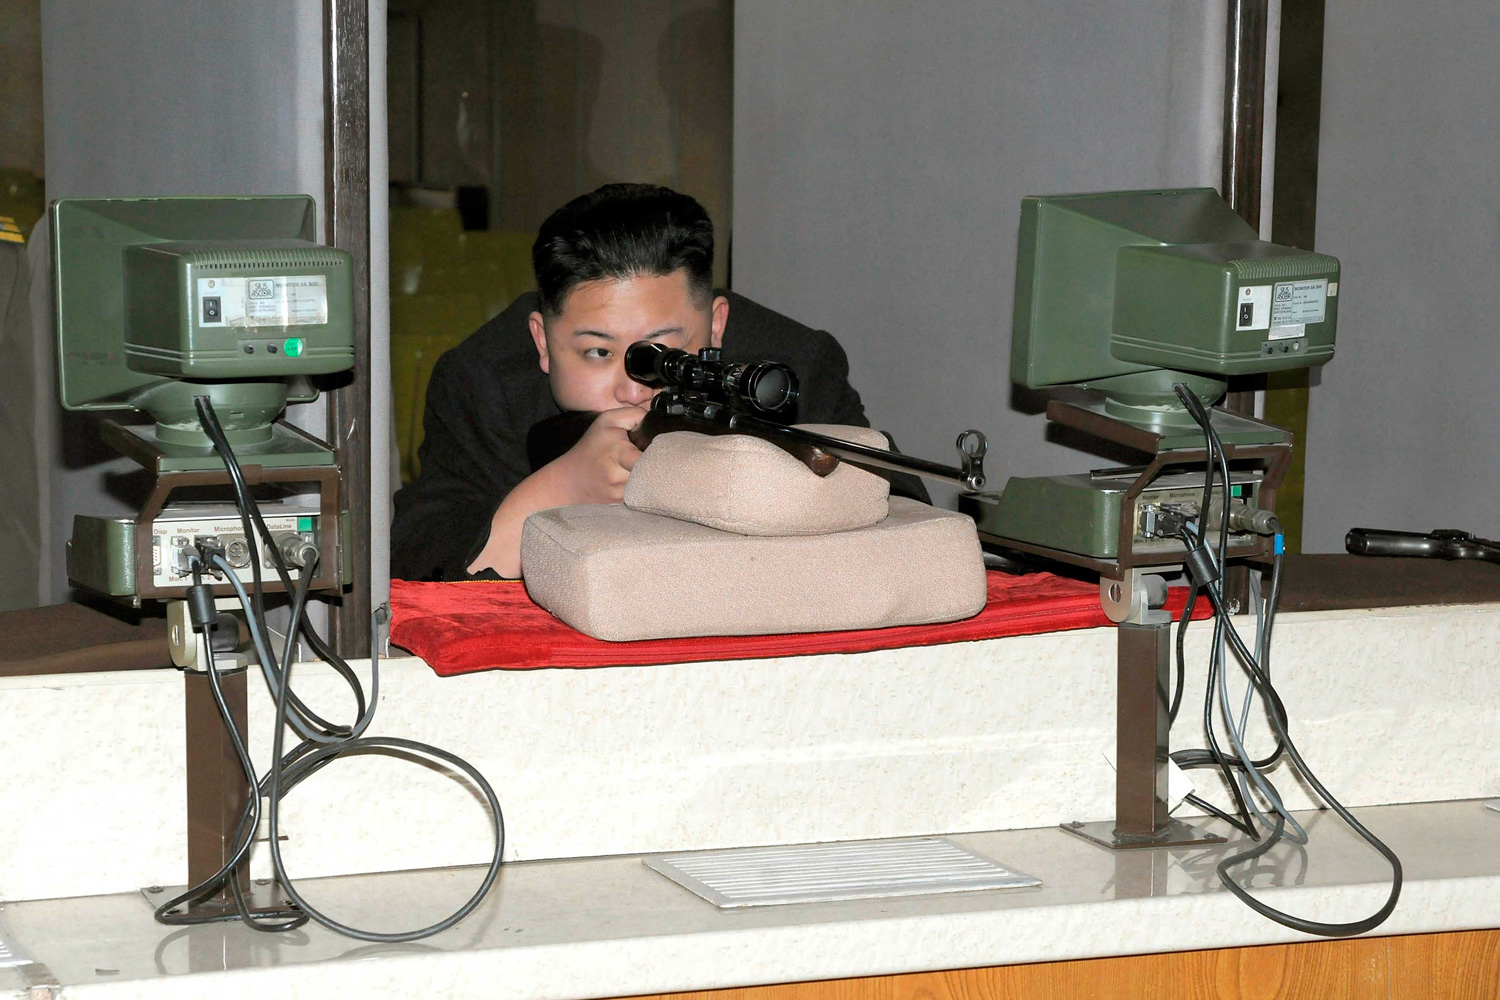 Feb. 23, 2012. North Korean leader Kim Jong-Un aims a rifle at the Sporting Bullet Factory, which was built in 1996 on the direct initiative of North Korea's late leader Kim Jong-il, in an undisclosed location in North Korea.